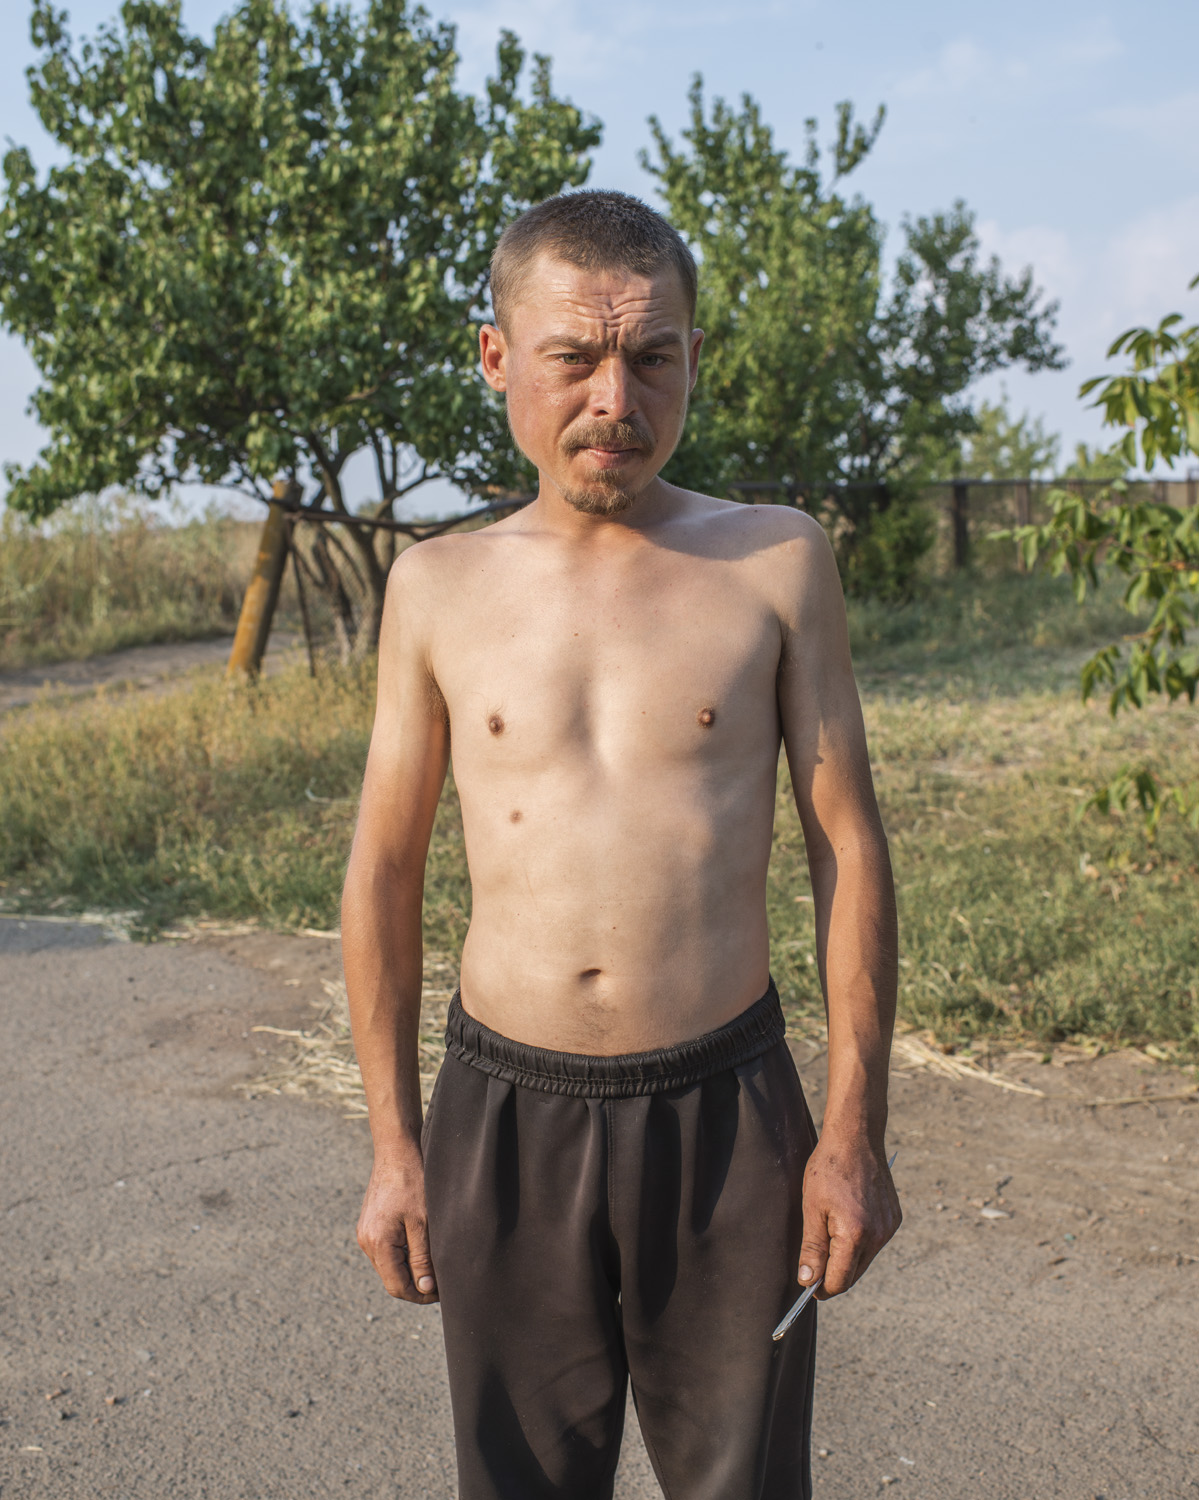  Leonid, 26, Anatol. "If the shelling comes here we can do nothing, it's heavy artillery you can't really hide." 